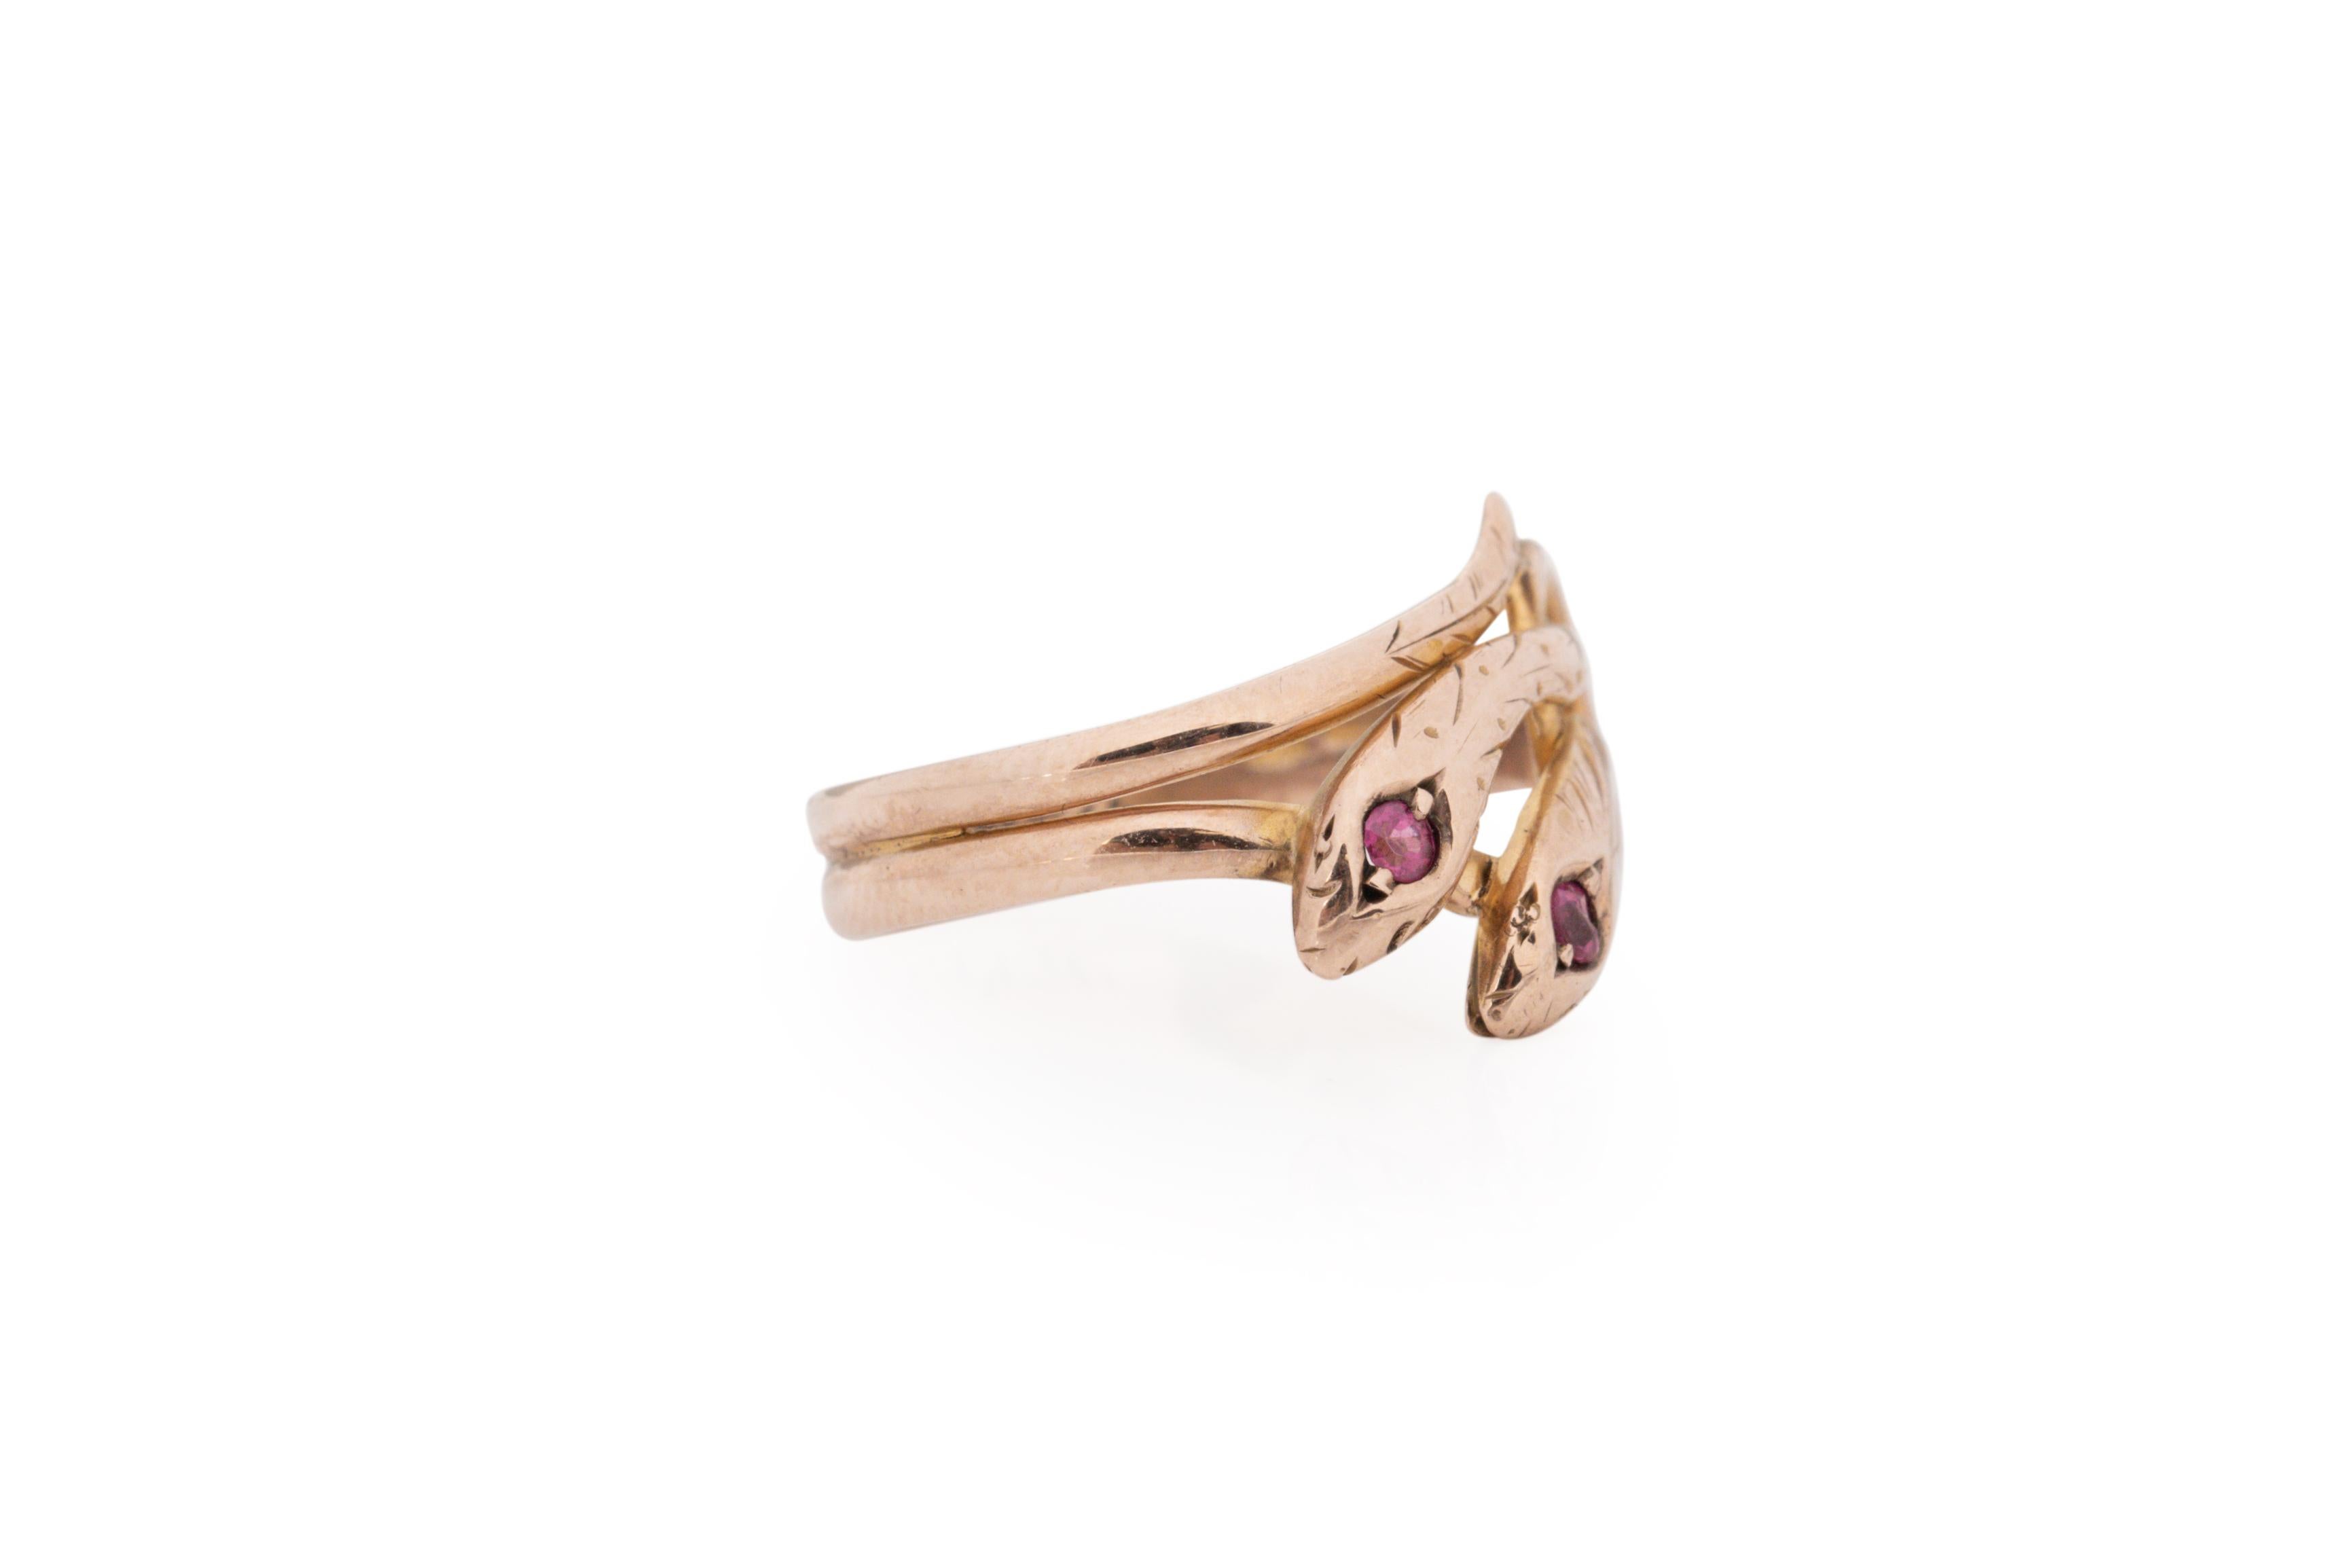 Ring Size: 7
Metal Type: 9 karat Rose Gold [Hallmarked, and Tested]
Weight: 3.0 grams

Ruby Details:
Weight: .06 carat, total weight
Cut: Antique European Cut
Color: Reddish pink:

Finger to Top of Stone Measurement: 3.5mm
Condition: Excellent